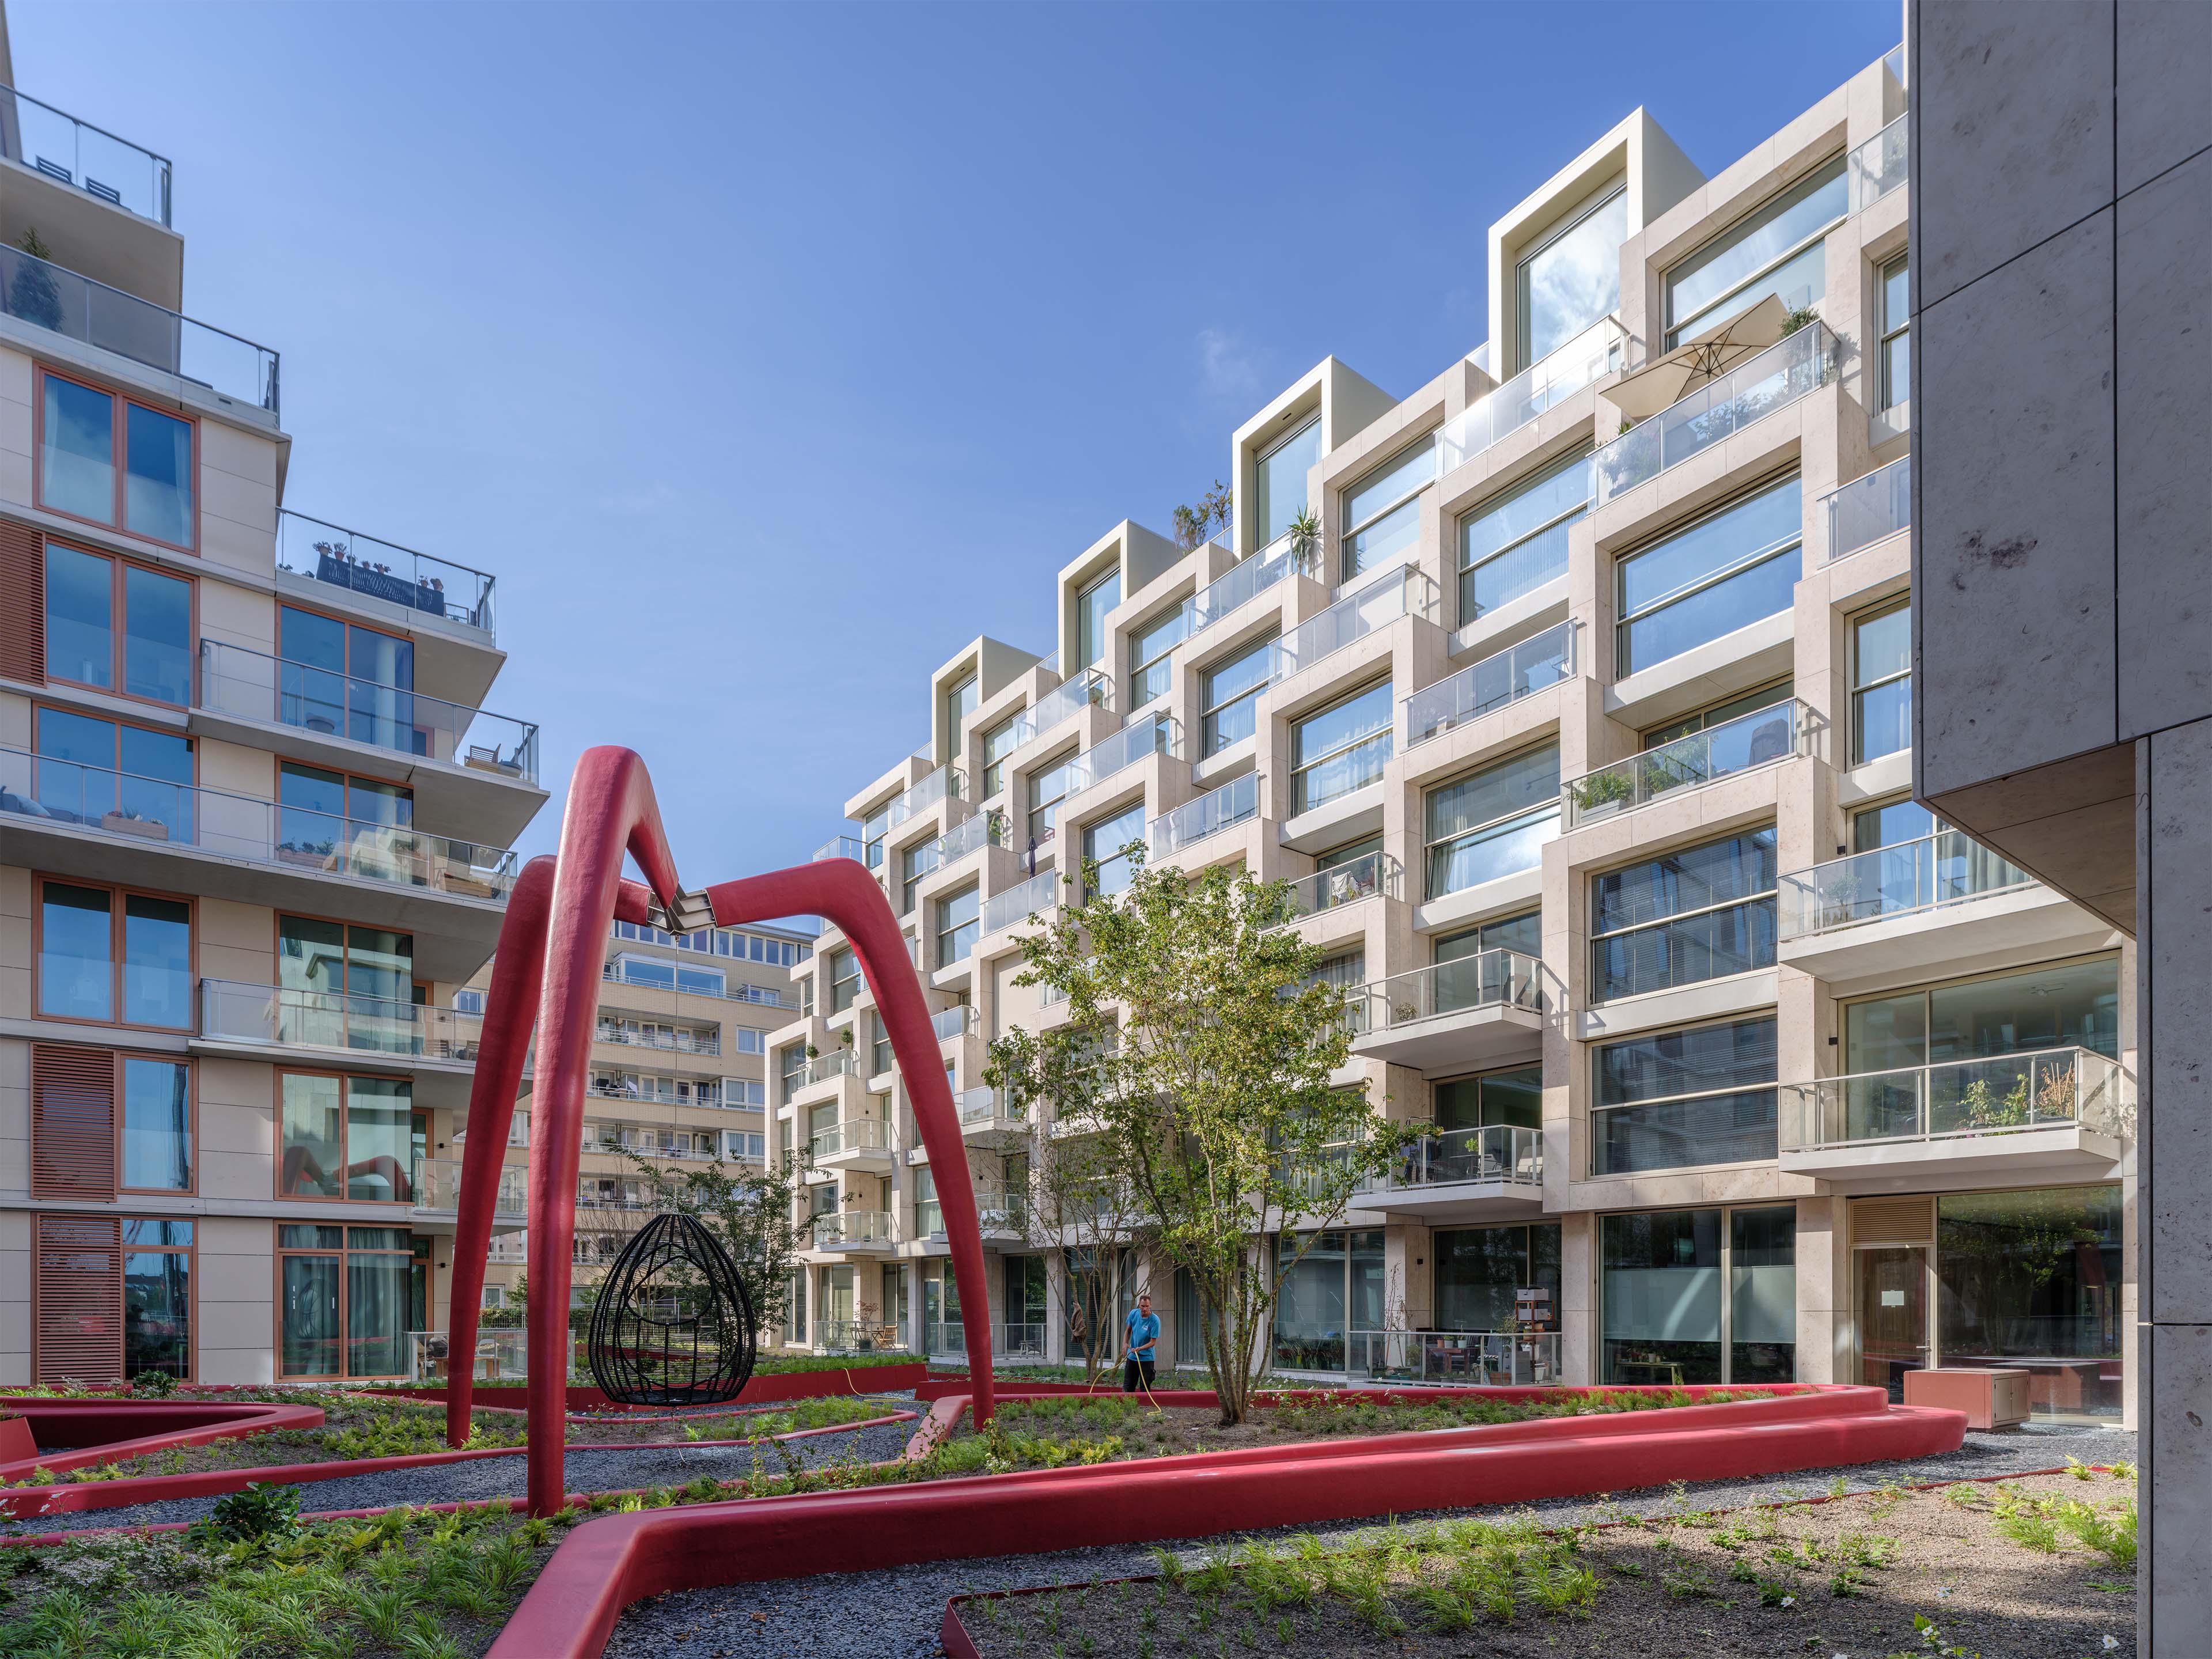 KCAP Projects The Grid and Droogbak Longlisted for ARC22 Awards